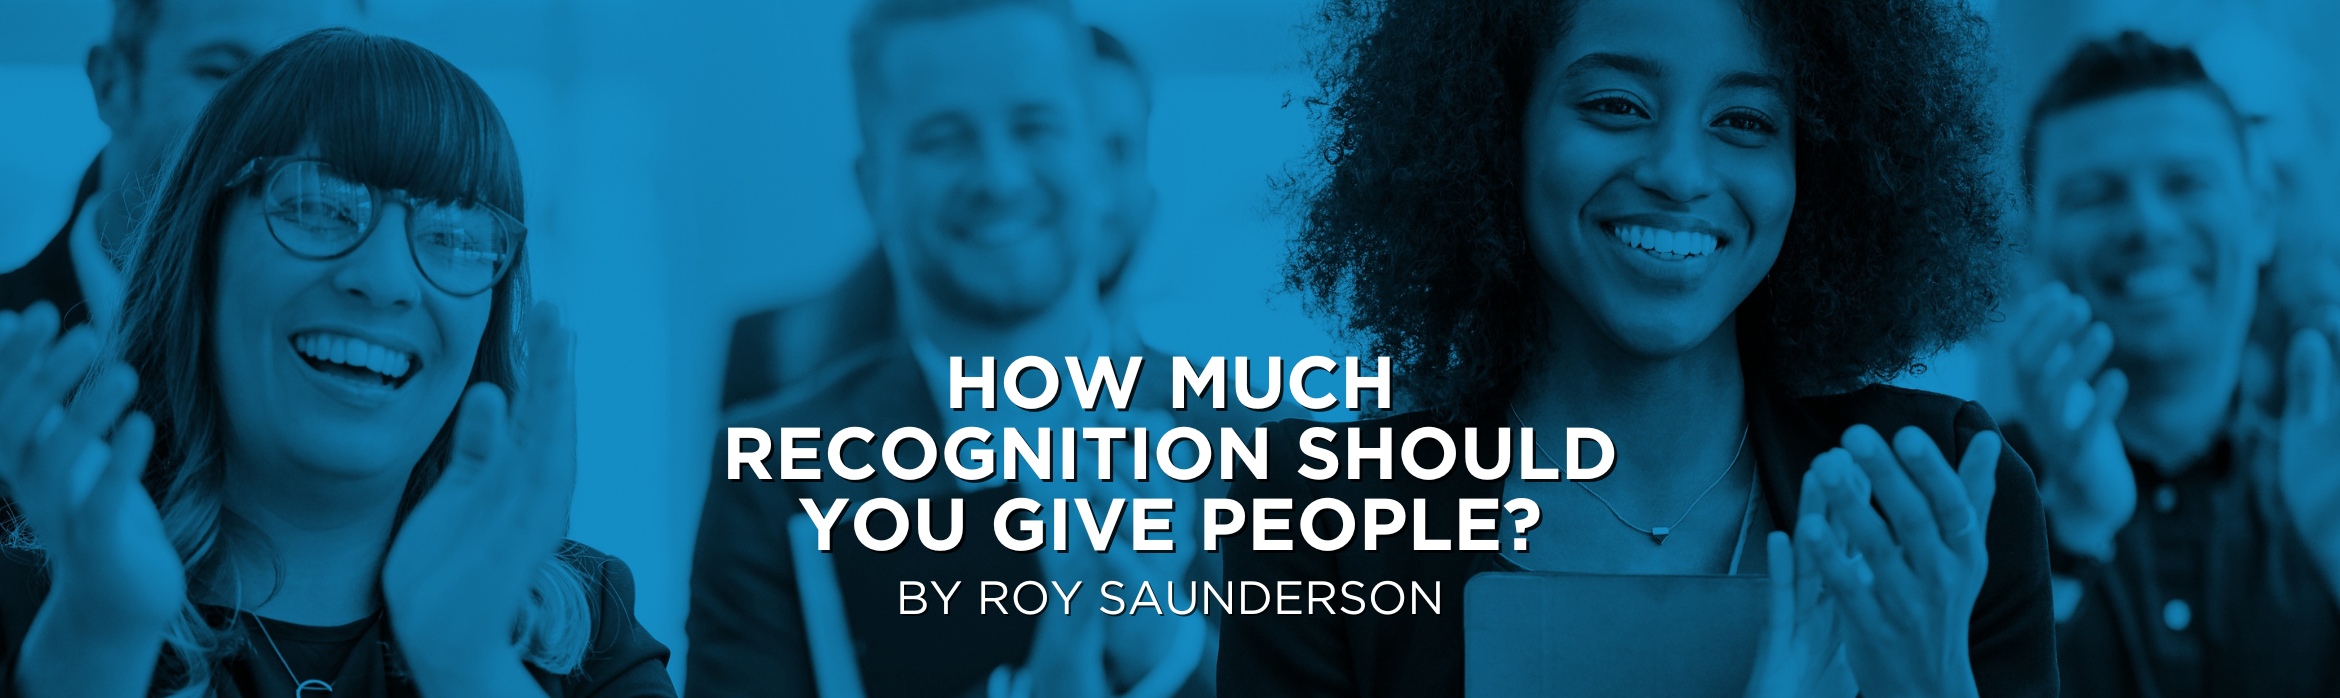 How Much Recognition Should You Give People?